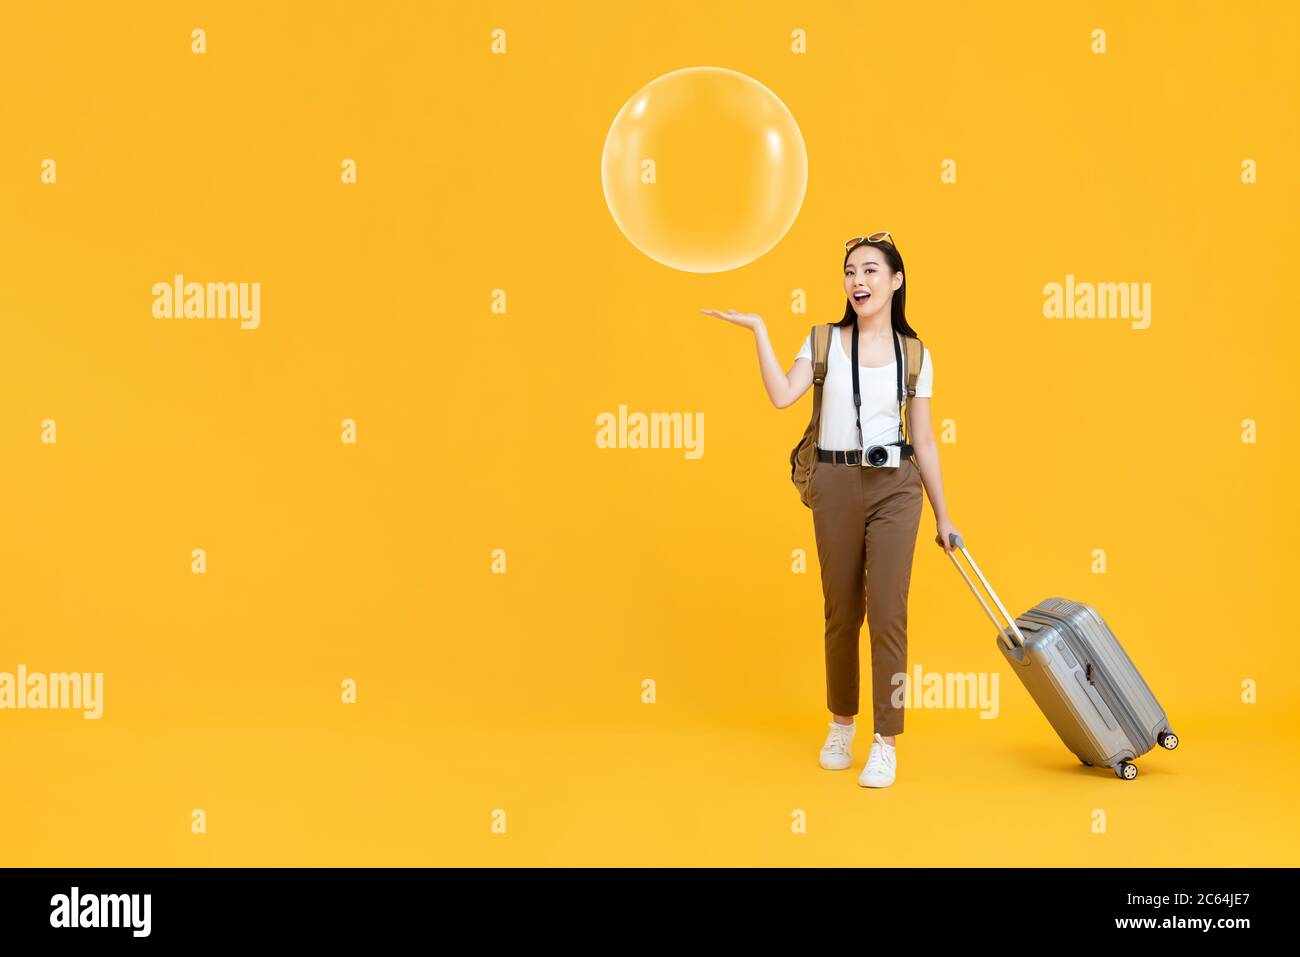 Full length portrait of  happy young Asian female tourist holding luggage with open palm showing bubble in isolated studio yellow background Stock Photo